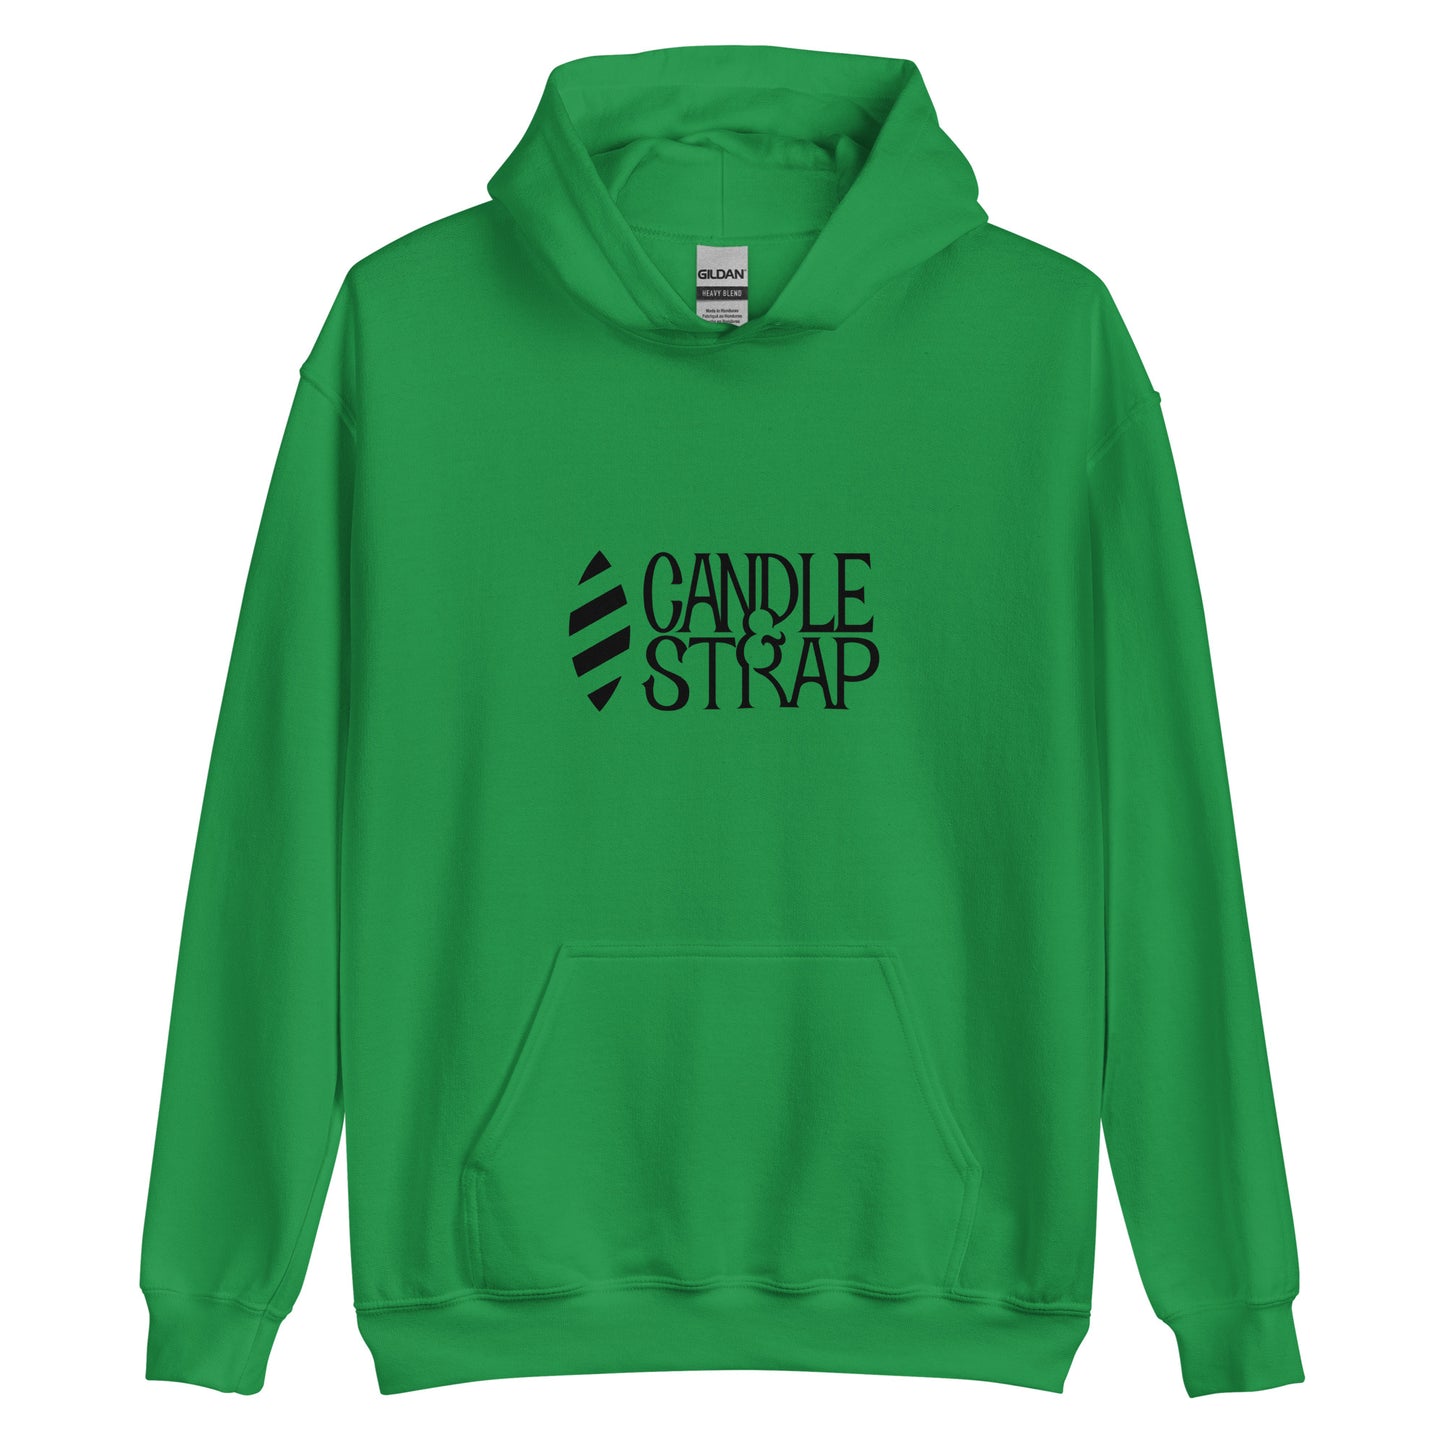 Candle & Strap - Unisex Hoodie